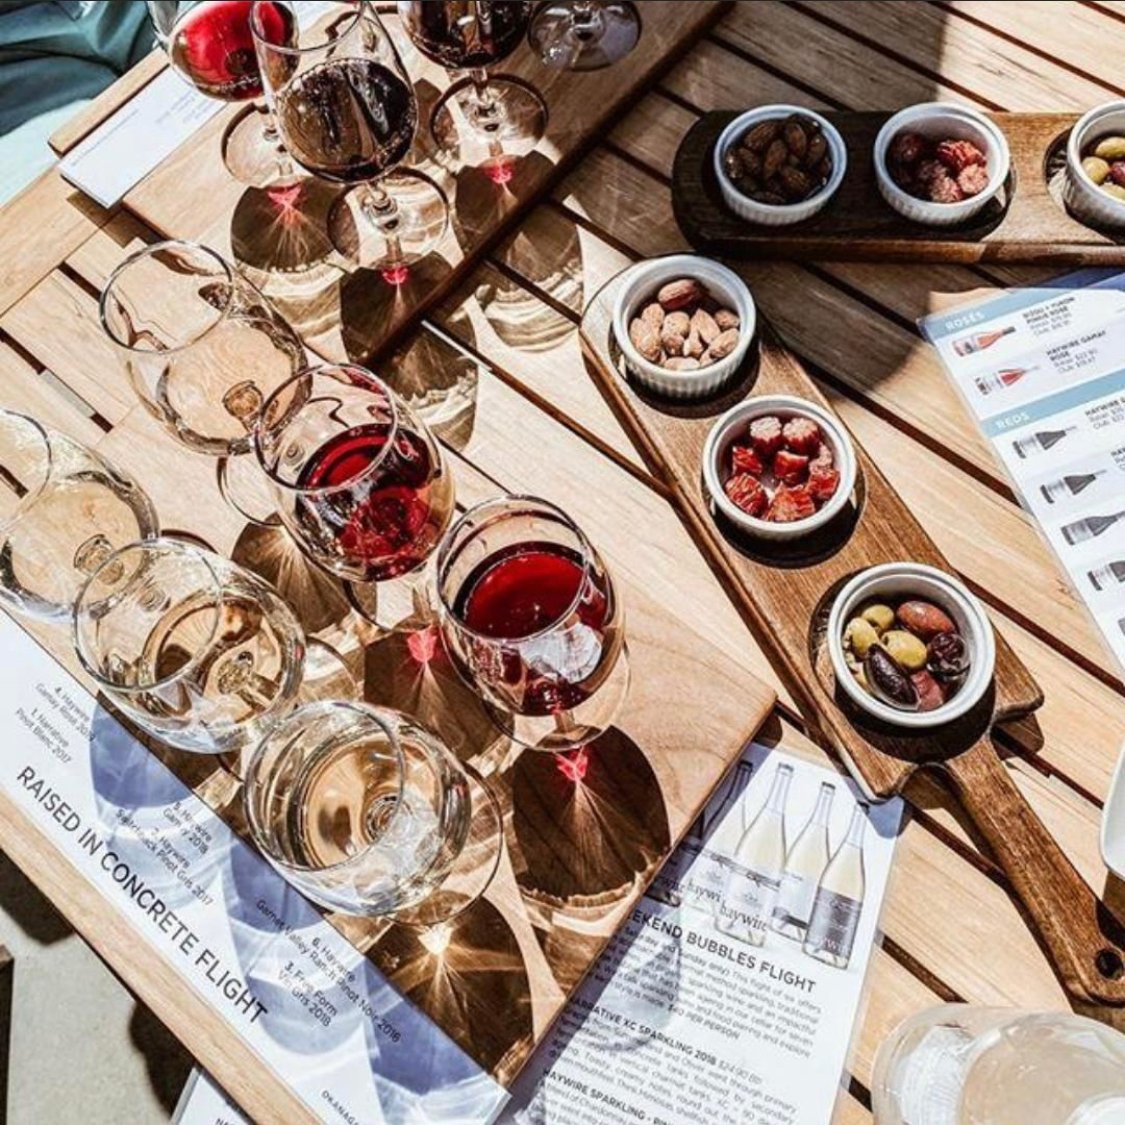 If you're looking for a great sit down wine experience - give @OKCrushPad in #Summerland , BC a call to reserve your tasting experience of choice! You'll also get some nibbles to pair with your wines! #OKWineFests